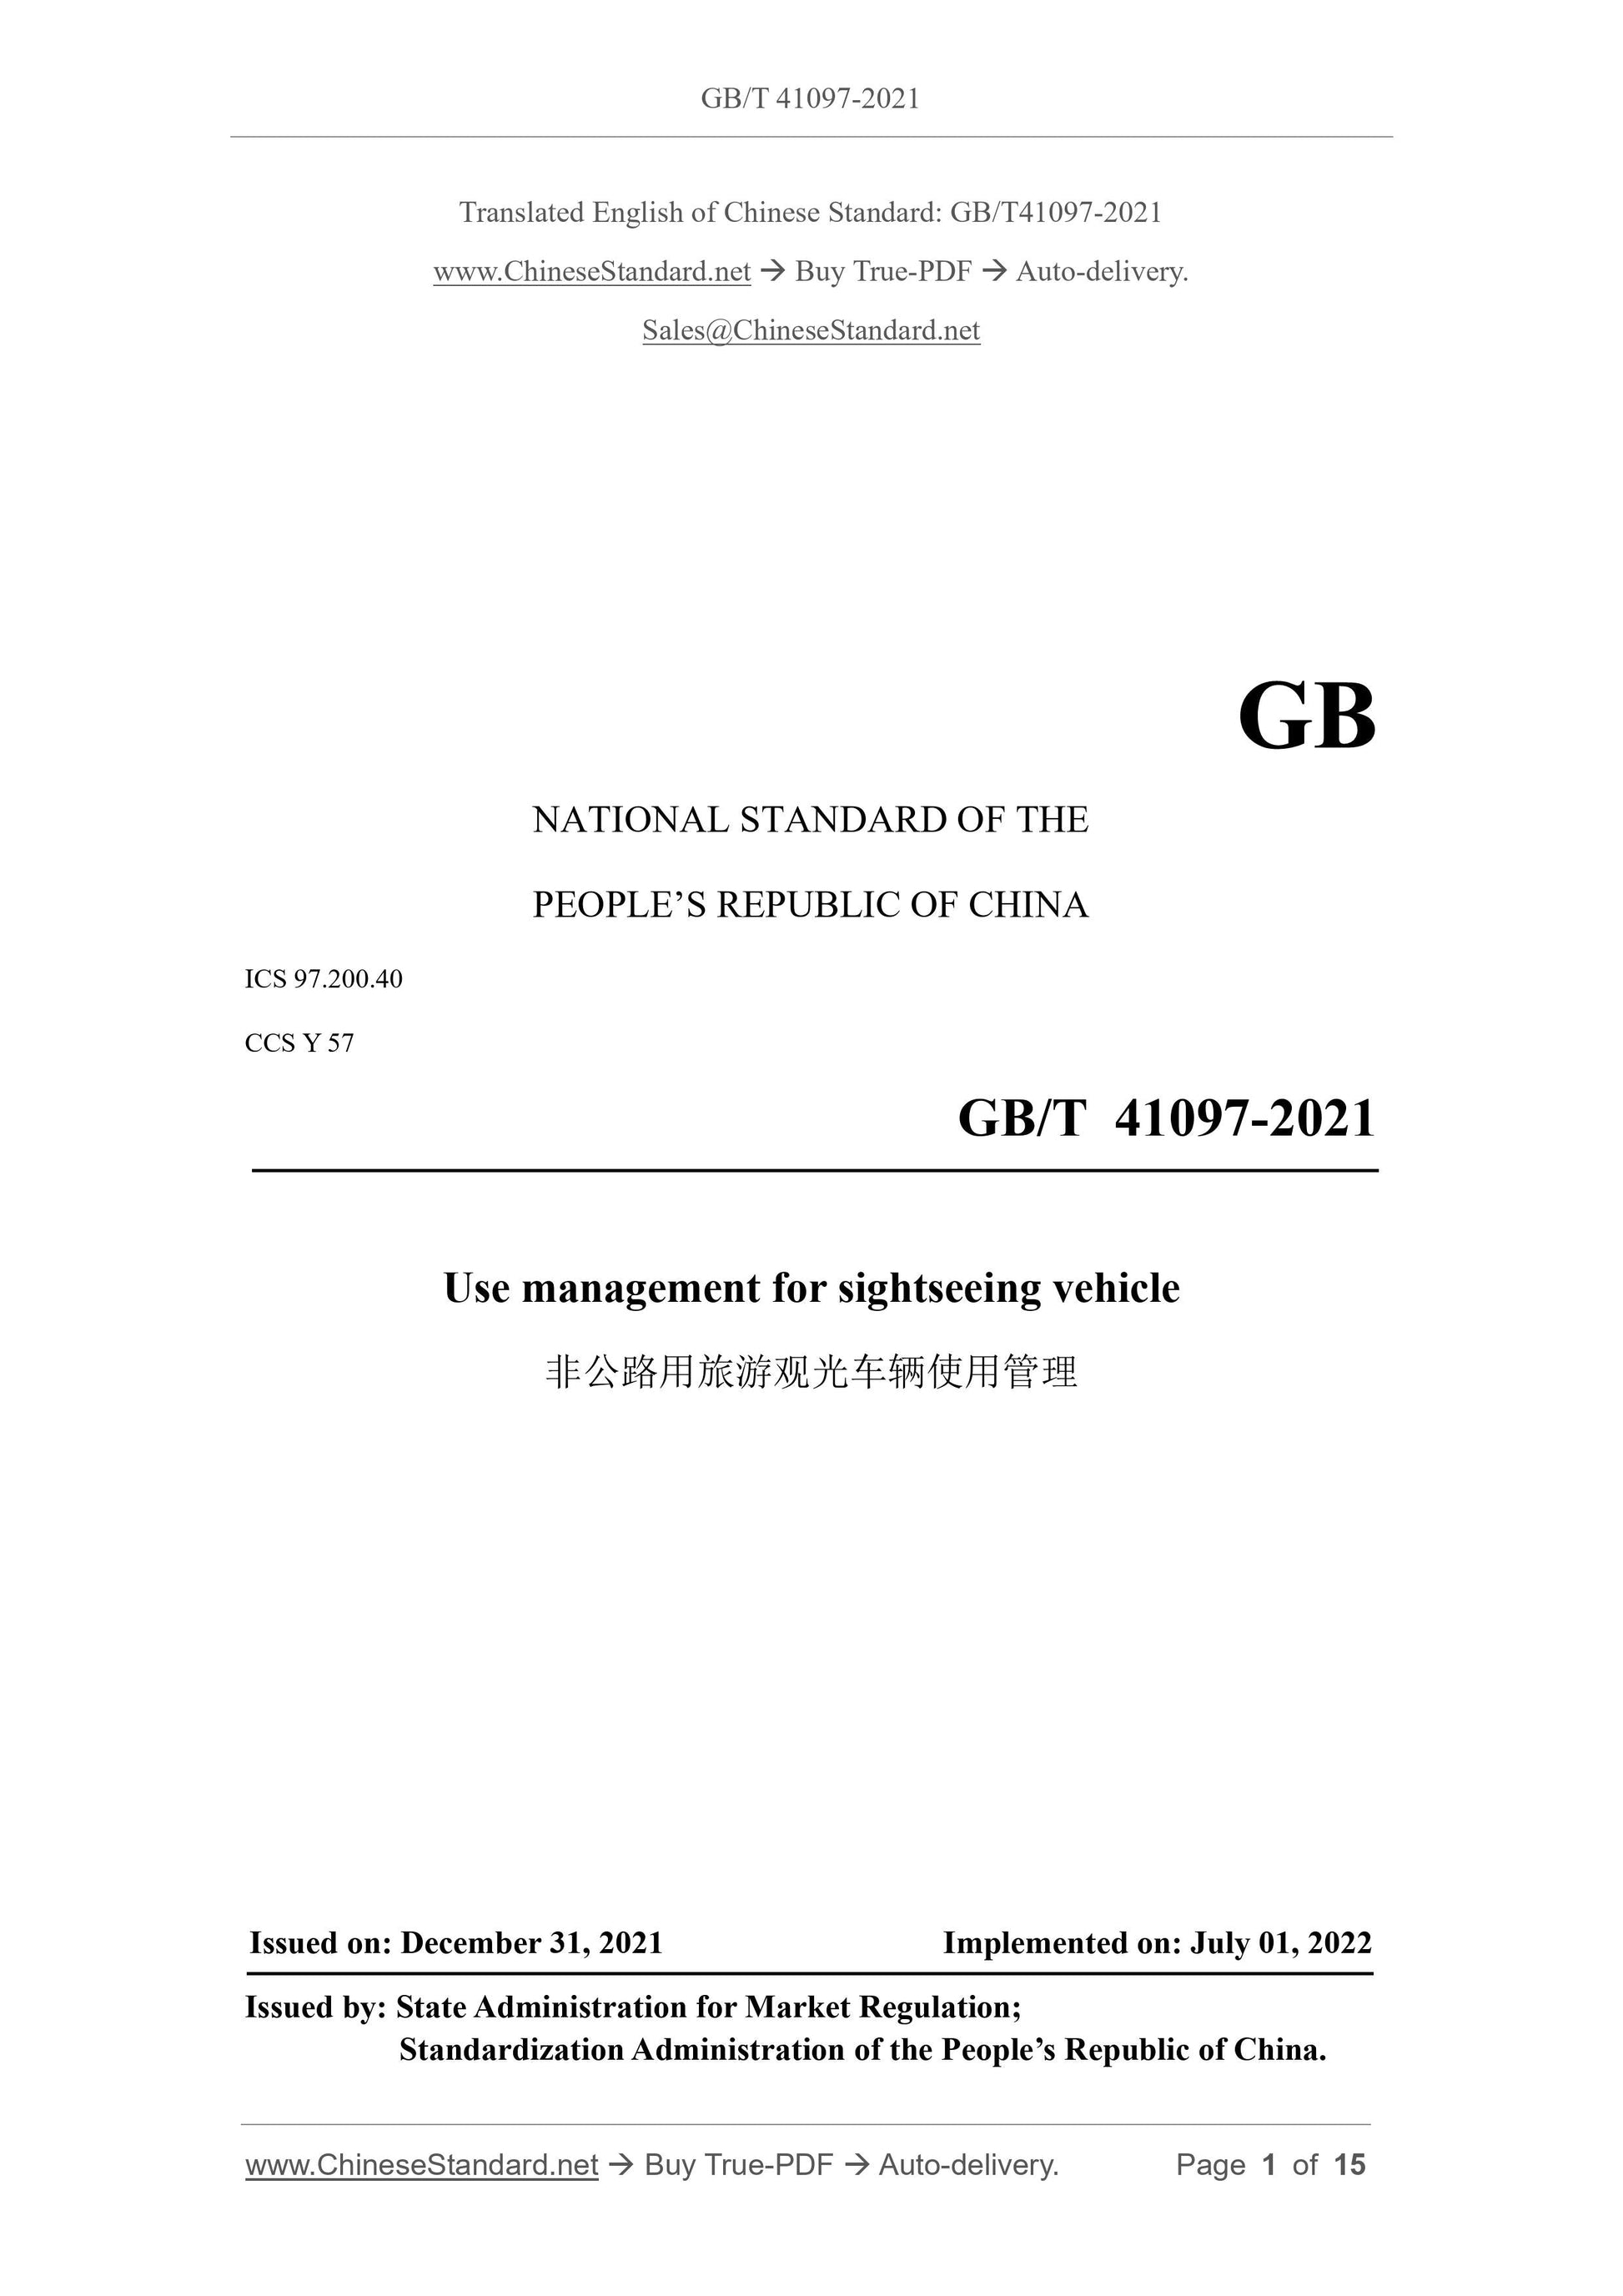 GB/T 41097-2021 Page 1